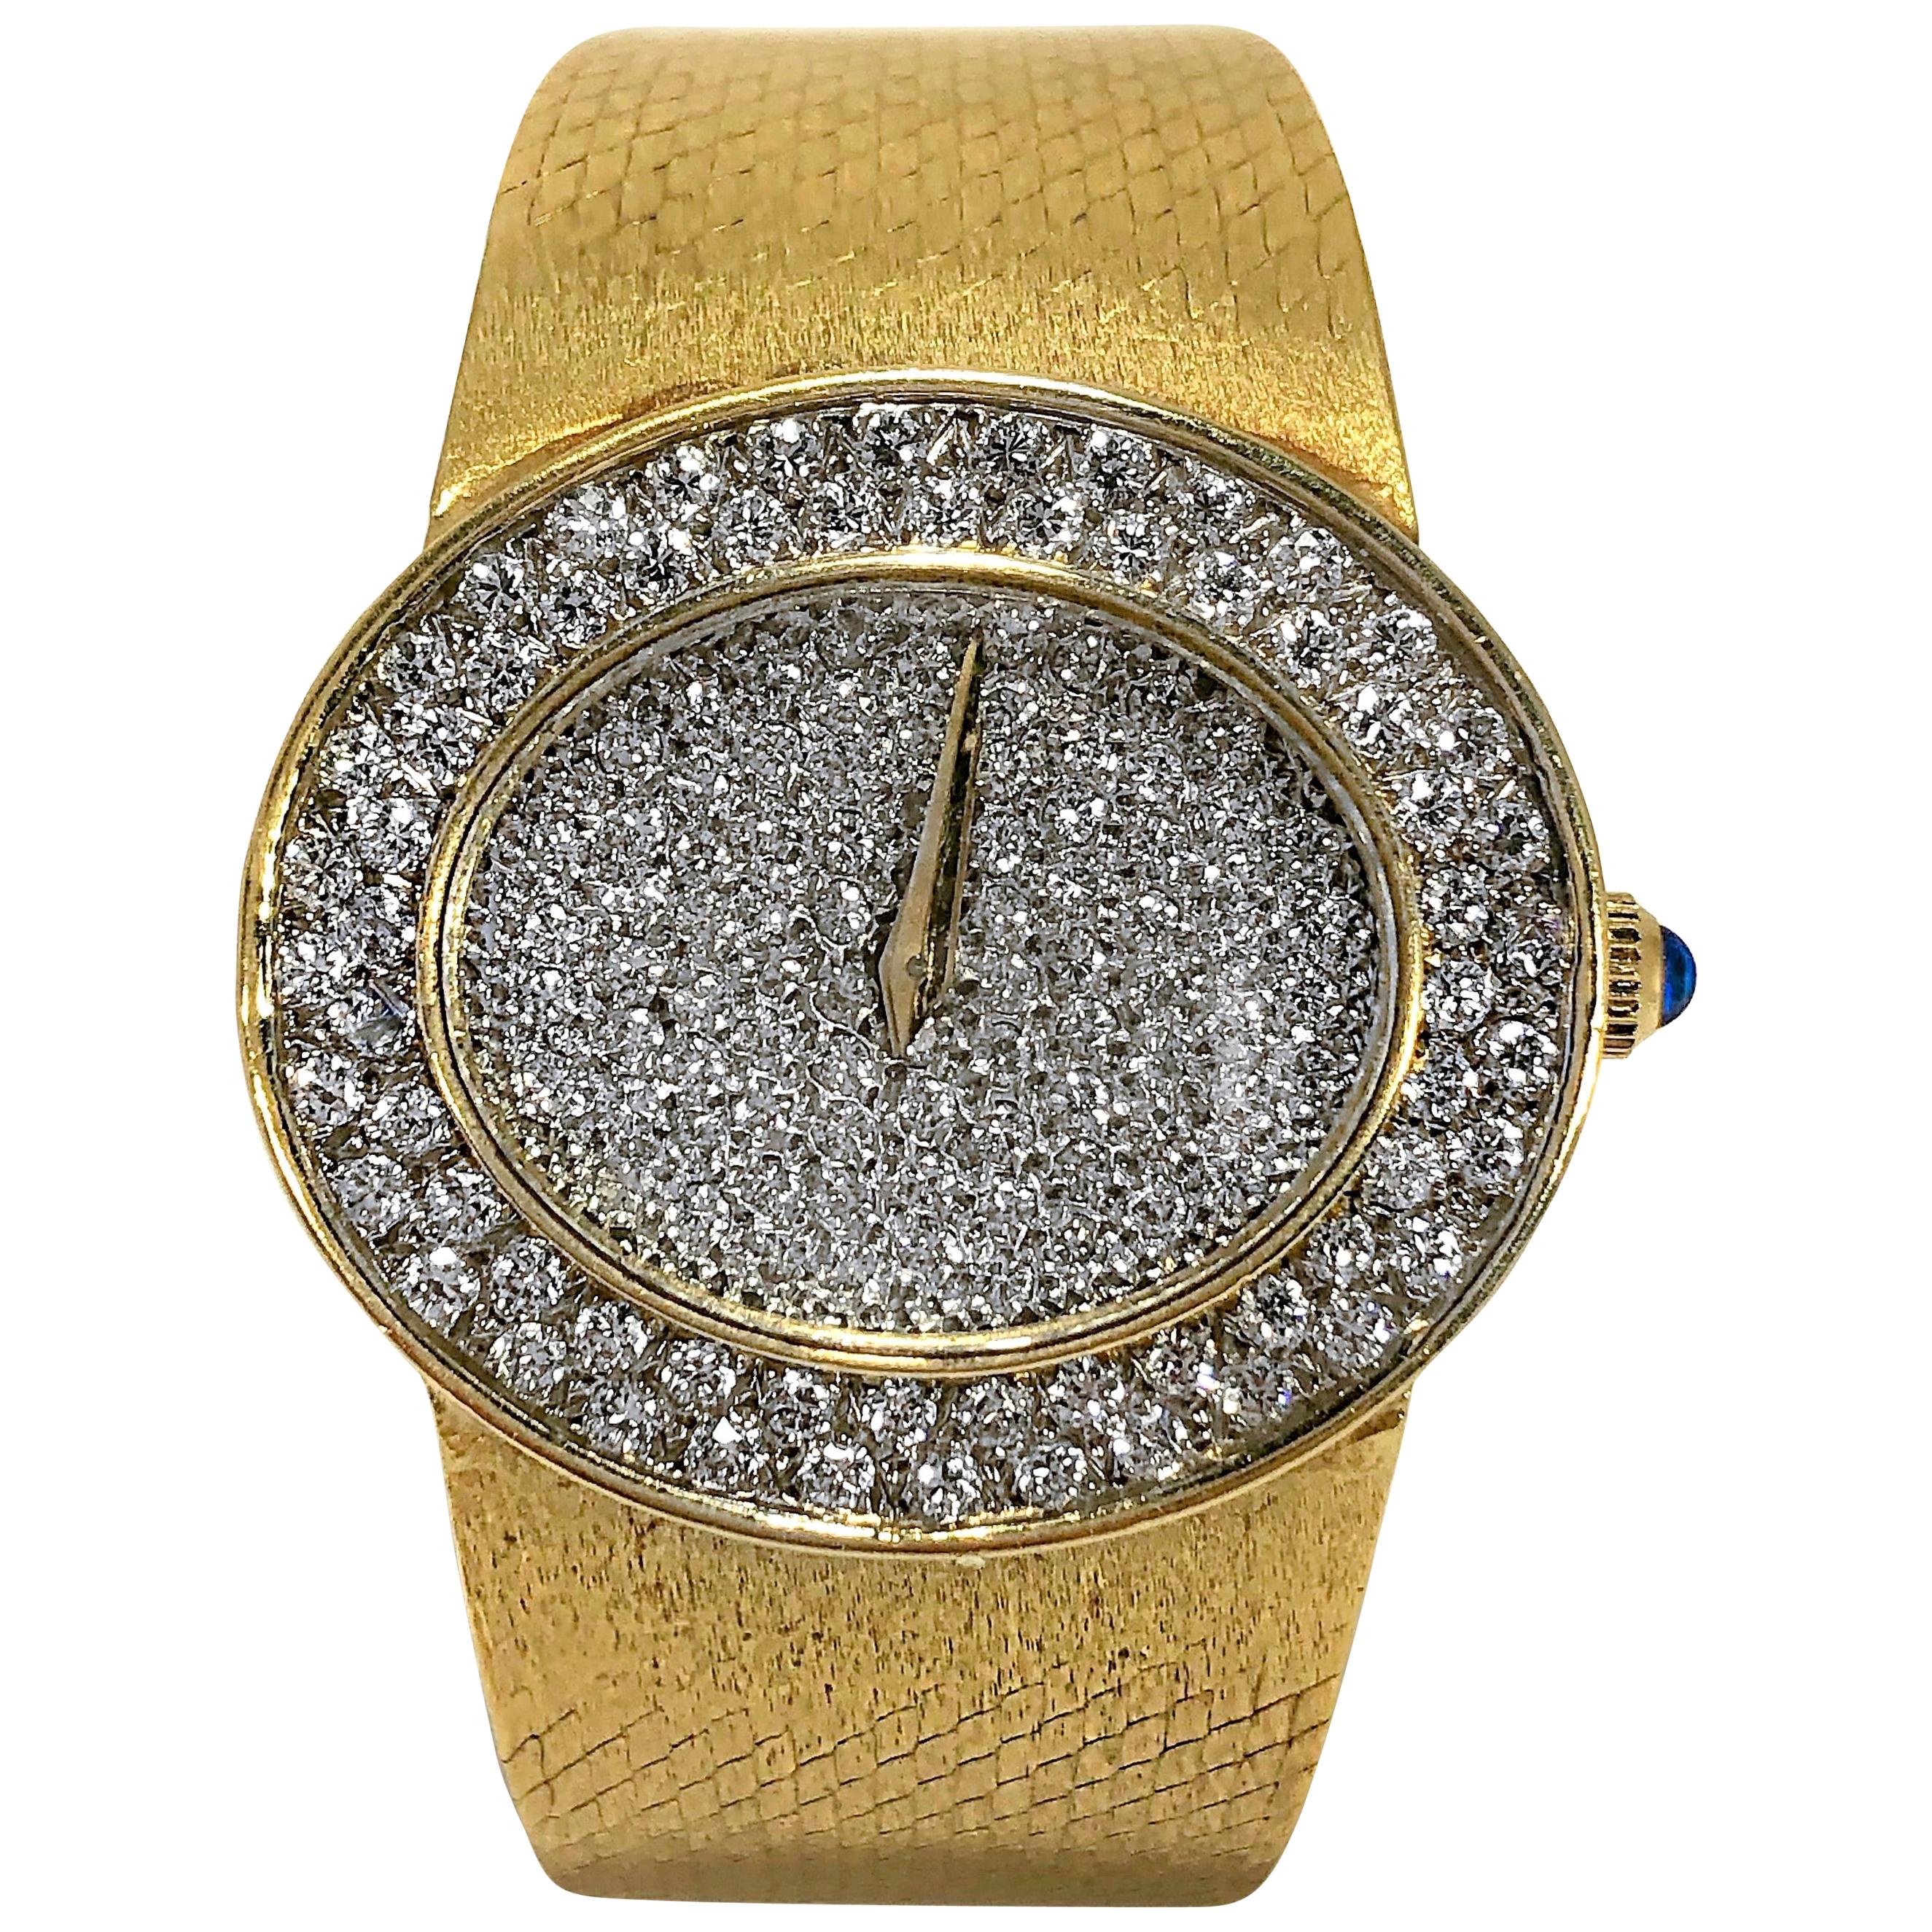 Large Scale Ladies Vintage Bueche Girod Yellow Gold and Diamond Wrist Watch